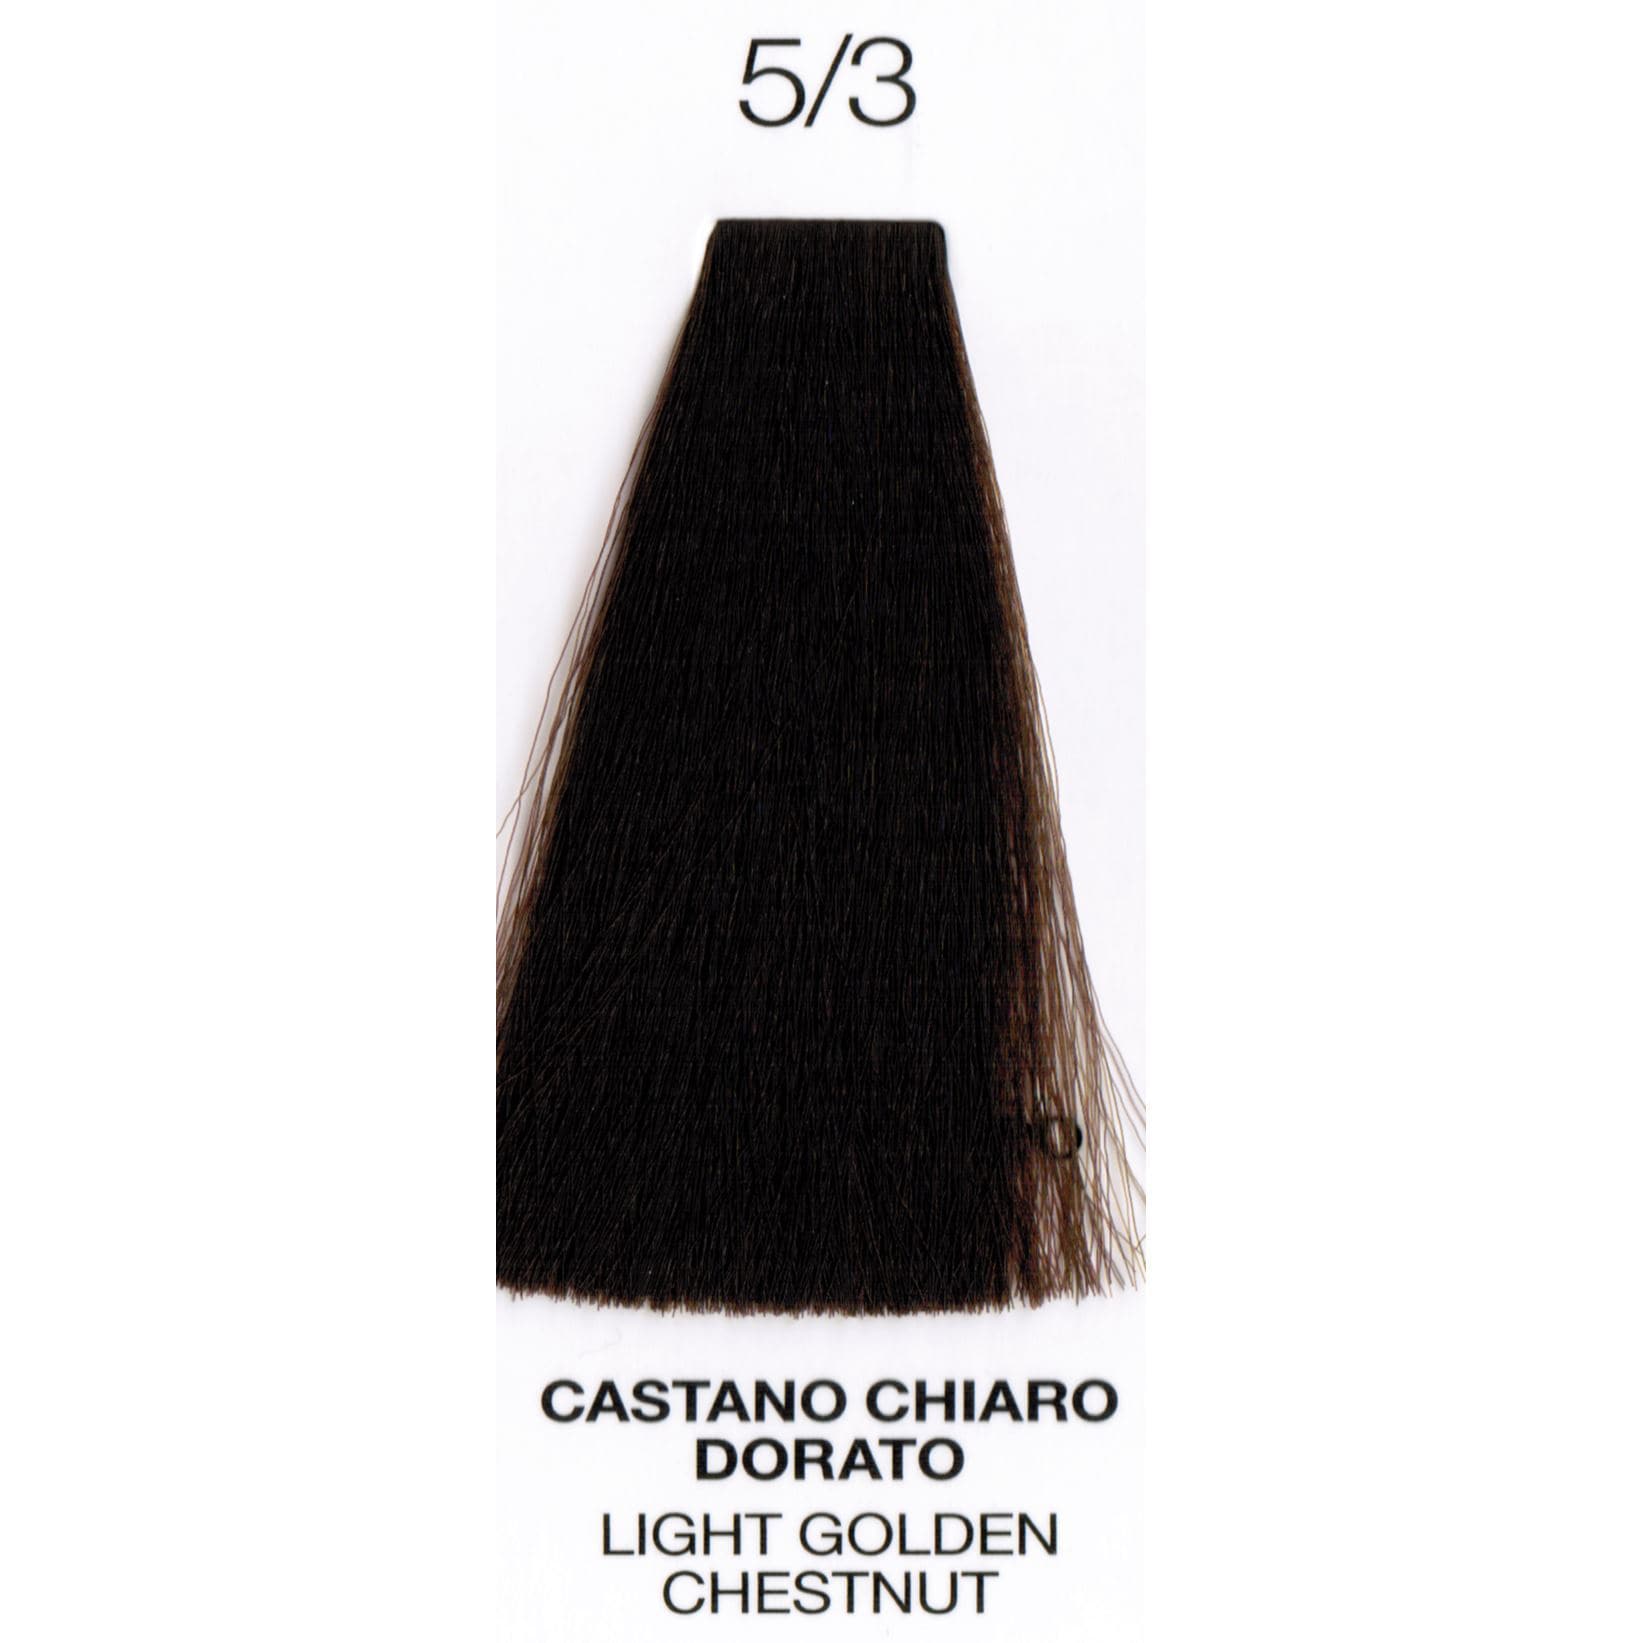 5/3 Light Golden Chestnut | Purity | Ammonia-Free Permanent Hair Color HAIR COLOR OYSTER 